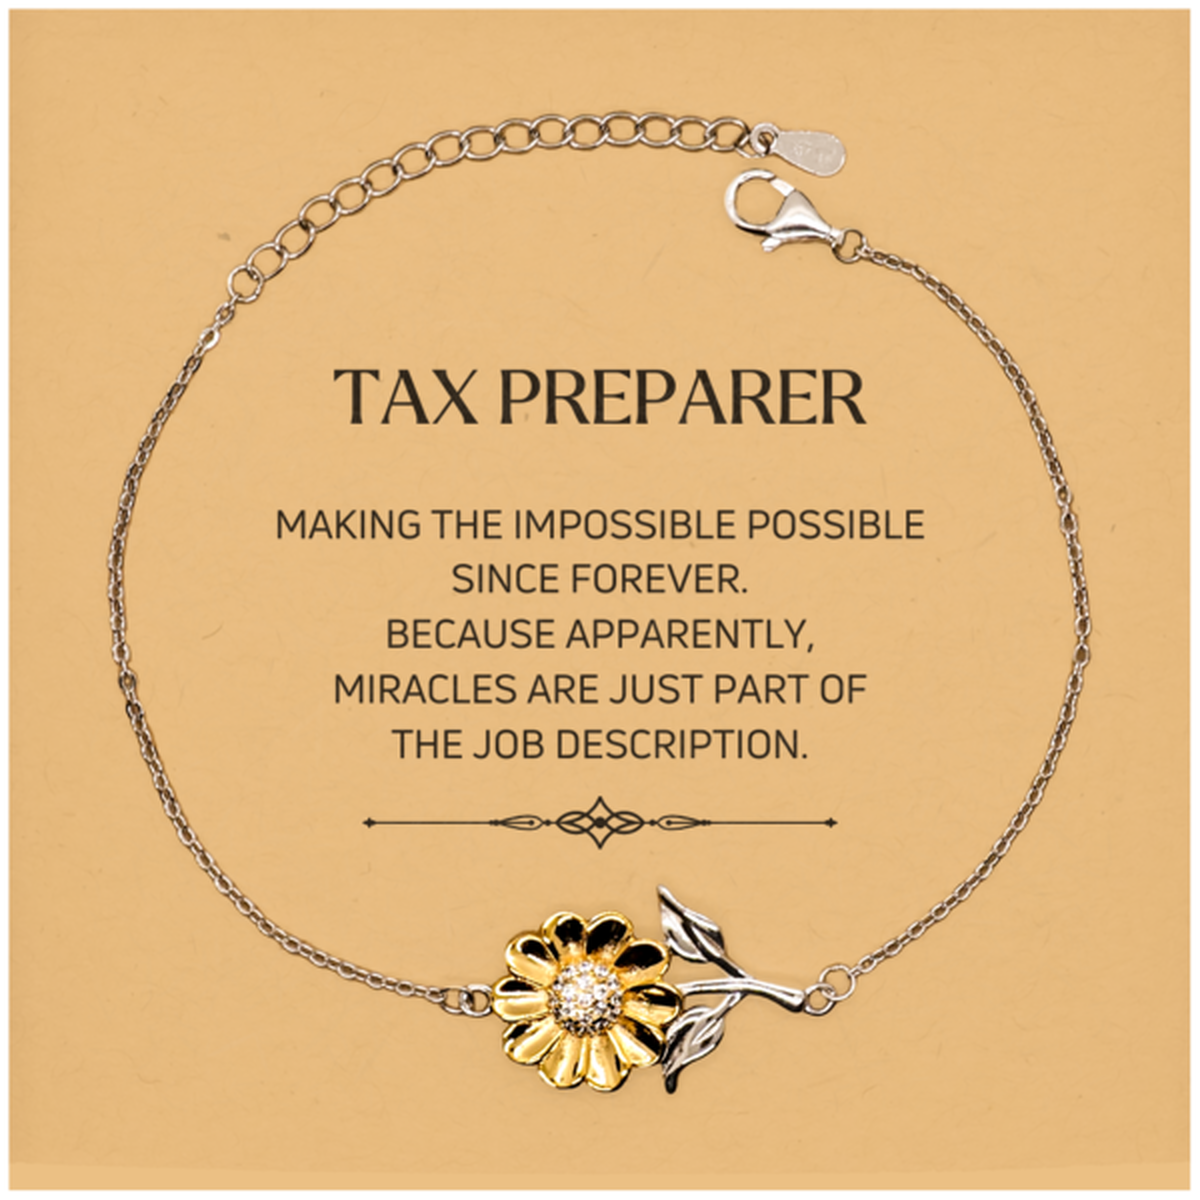 Funny Tax Preparer Gifts, Miracles are just part of the job description, Inspirational Birthday Christmas Sunflower Bracelet For Tax Preparer, Men, Women, Coworkers, Friends, Boss